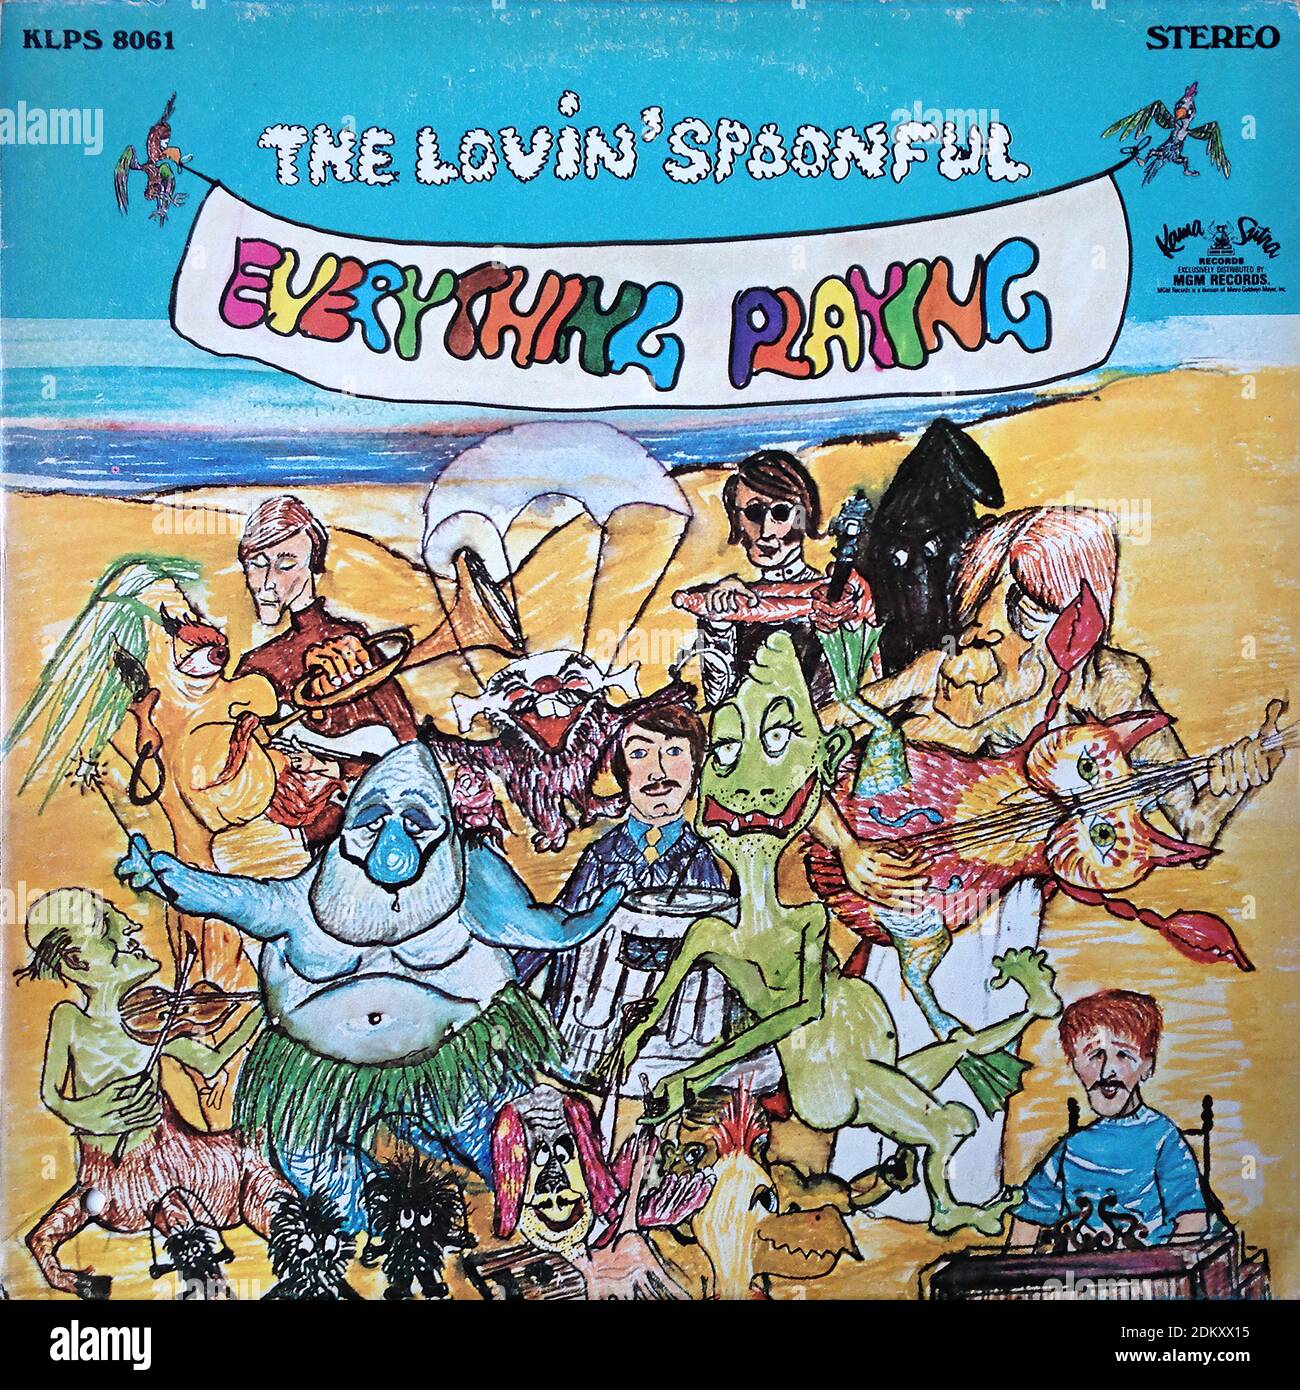 The lovin' spoonful - Everying Playing, MGM Kamasutra KLPS 8061 - Vintage  vinyle album couverture Photo Stock - Alamy